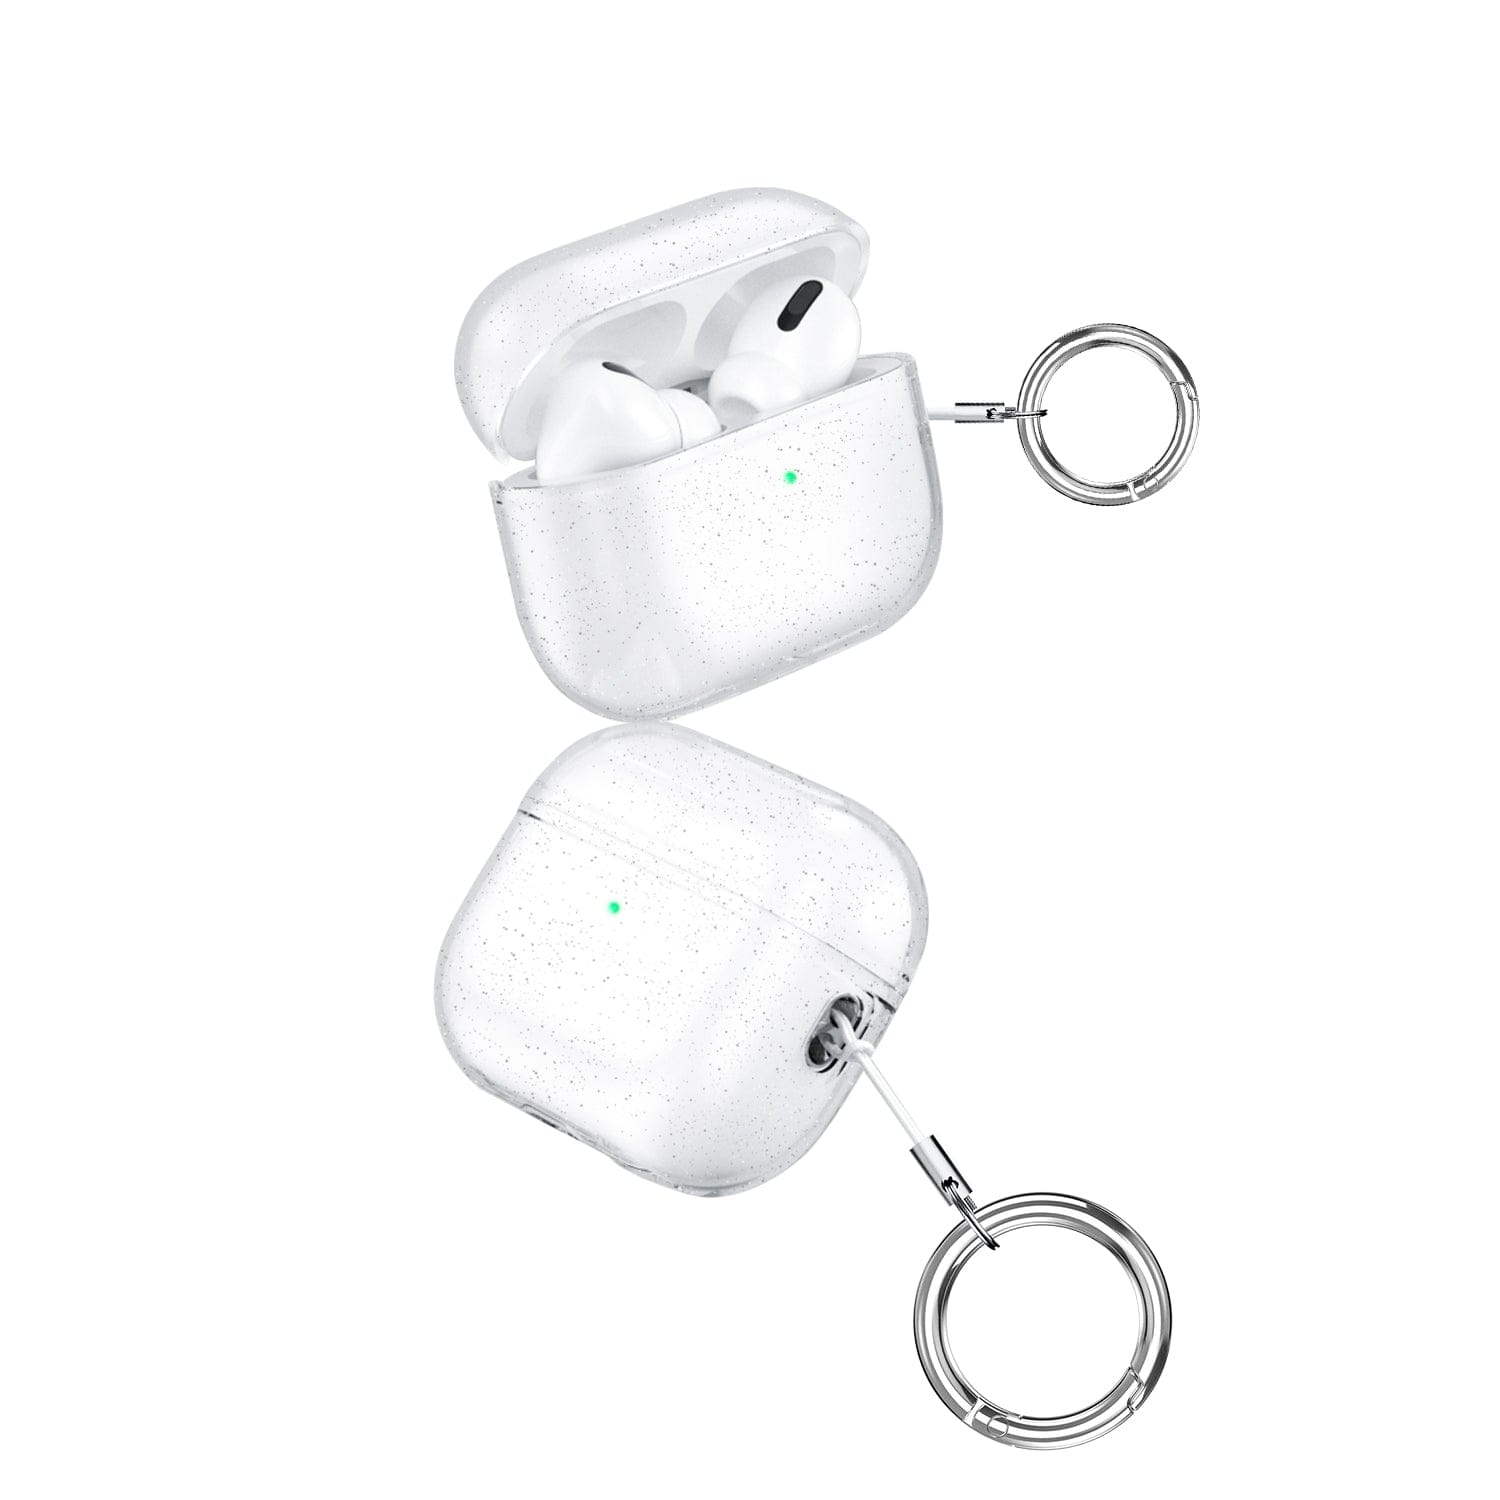 Sparkle Series Case for Apple AirPods Pro 2 (2nd Generation) - Clear